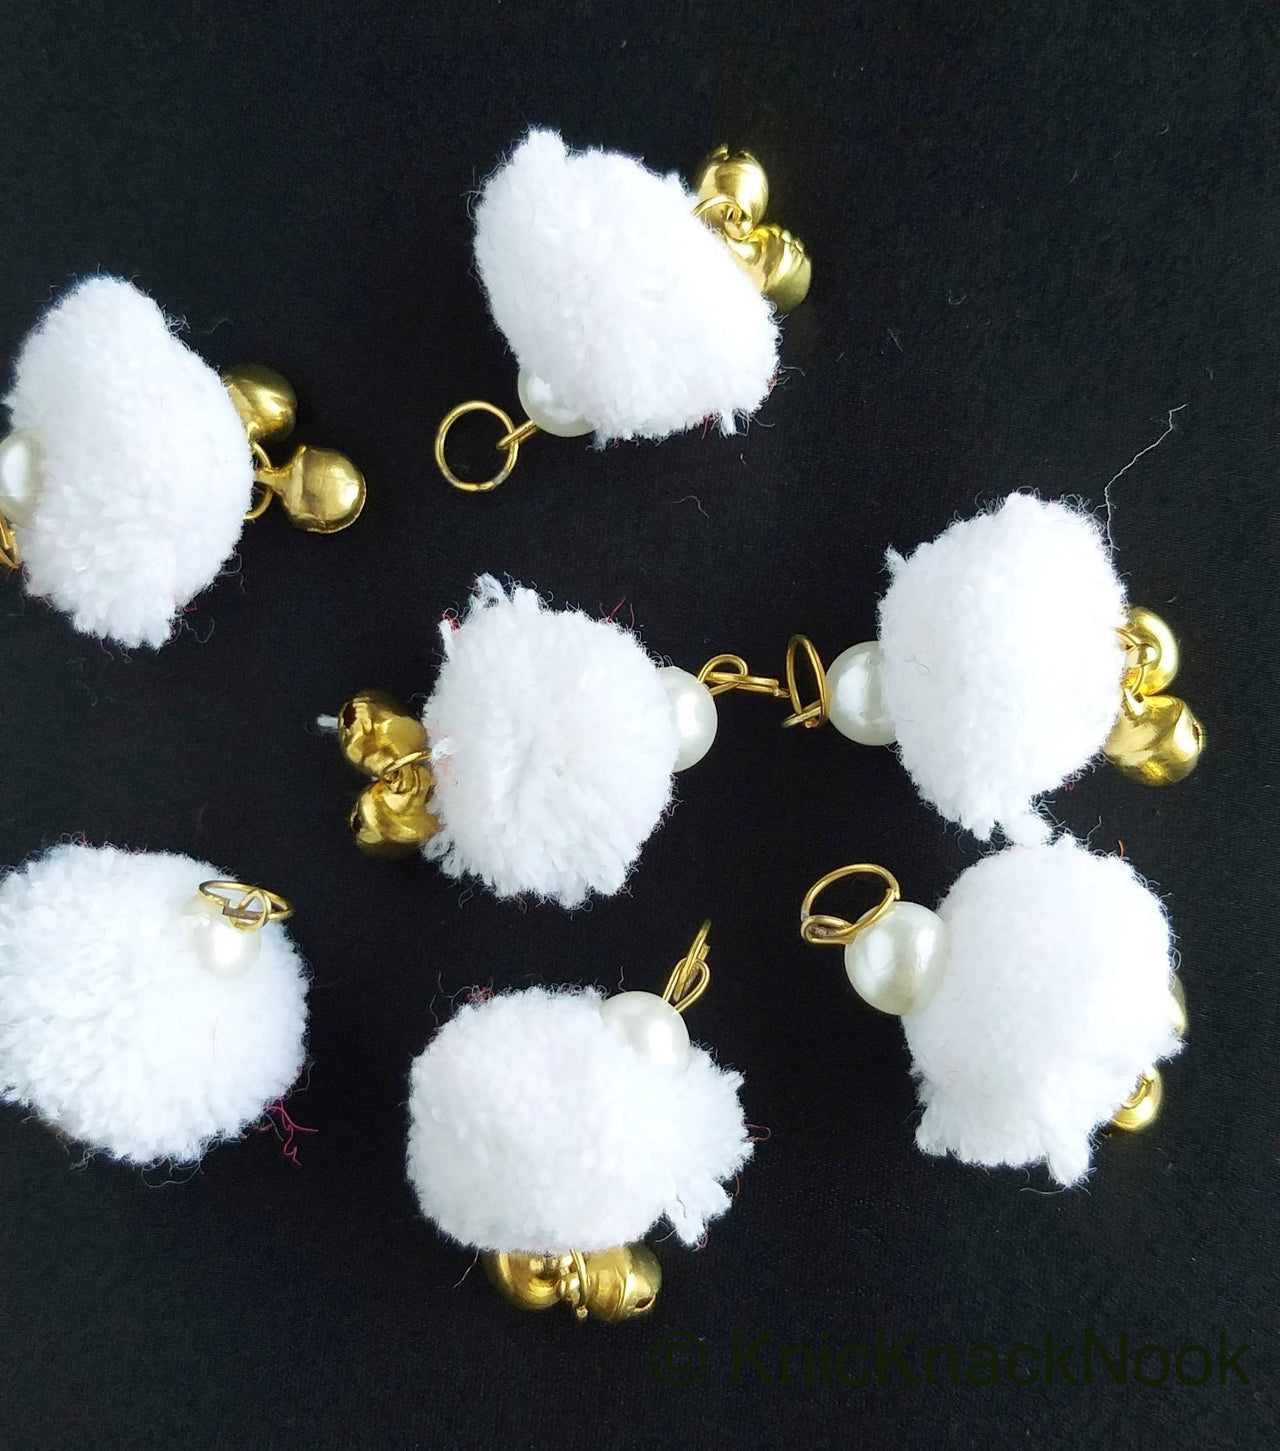 6 x White Pom-Pom Tassel Latkan With Pearl Beads And Jingle Bell Beads, Pompom Decorations, Approx. 30mm - 210119L210